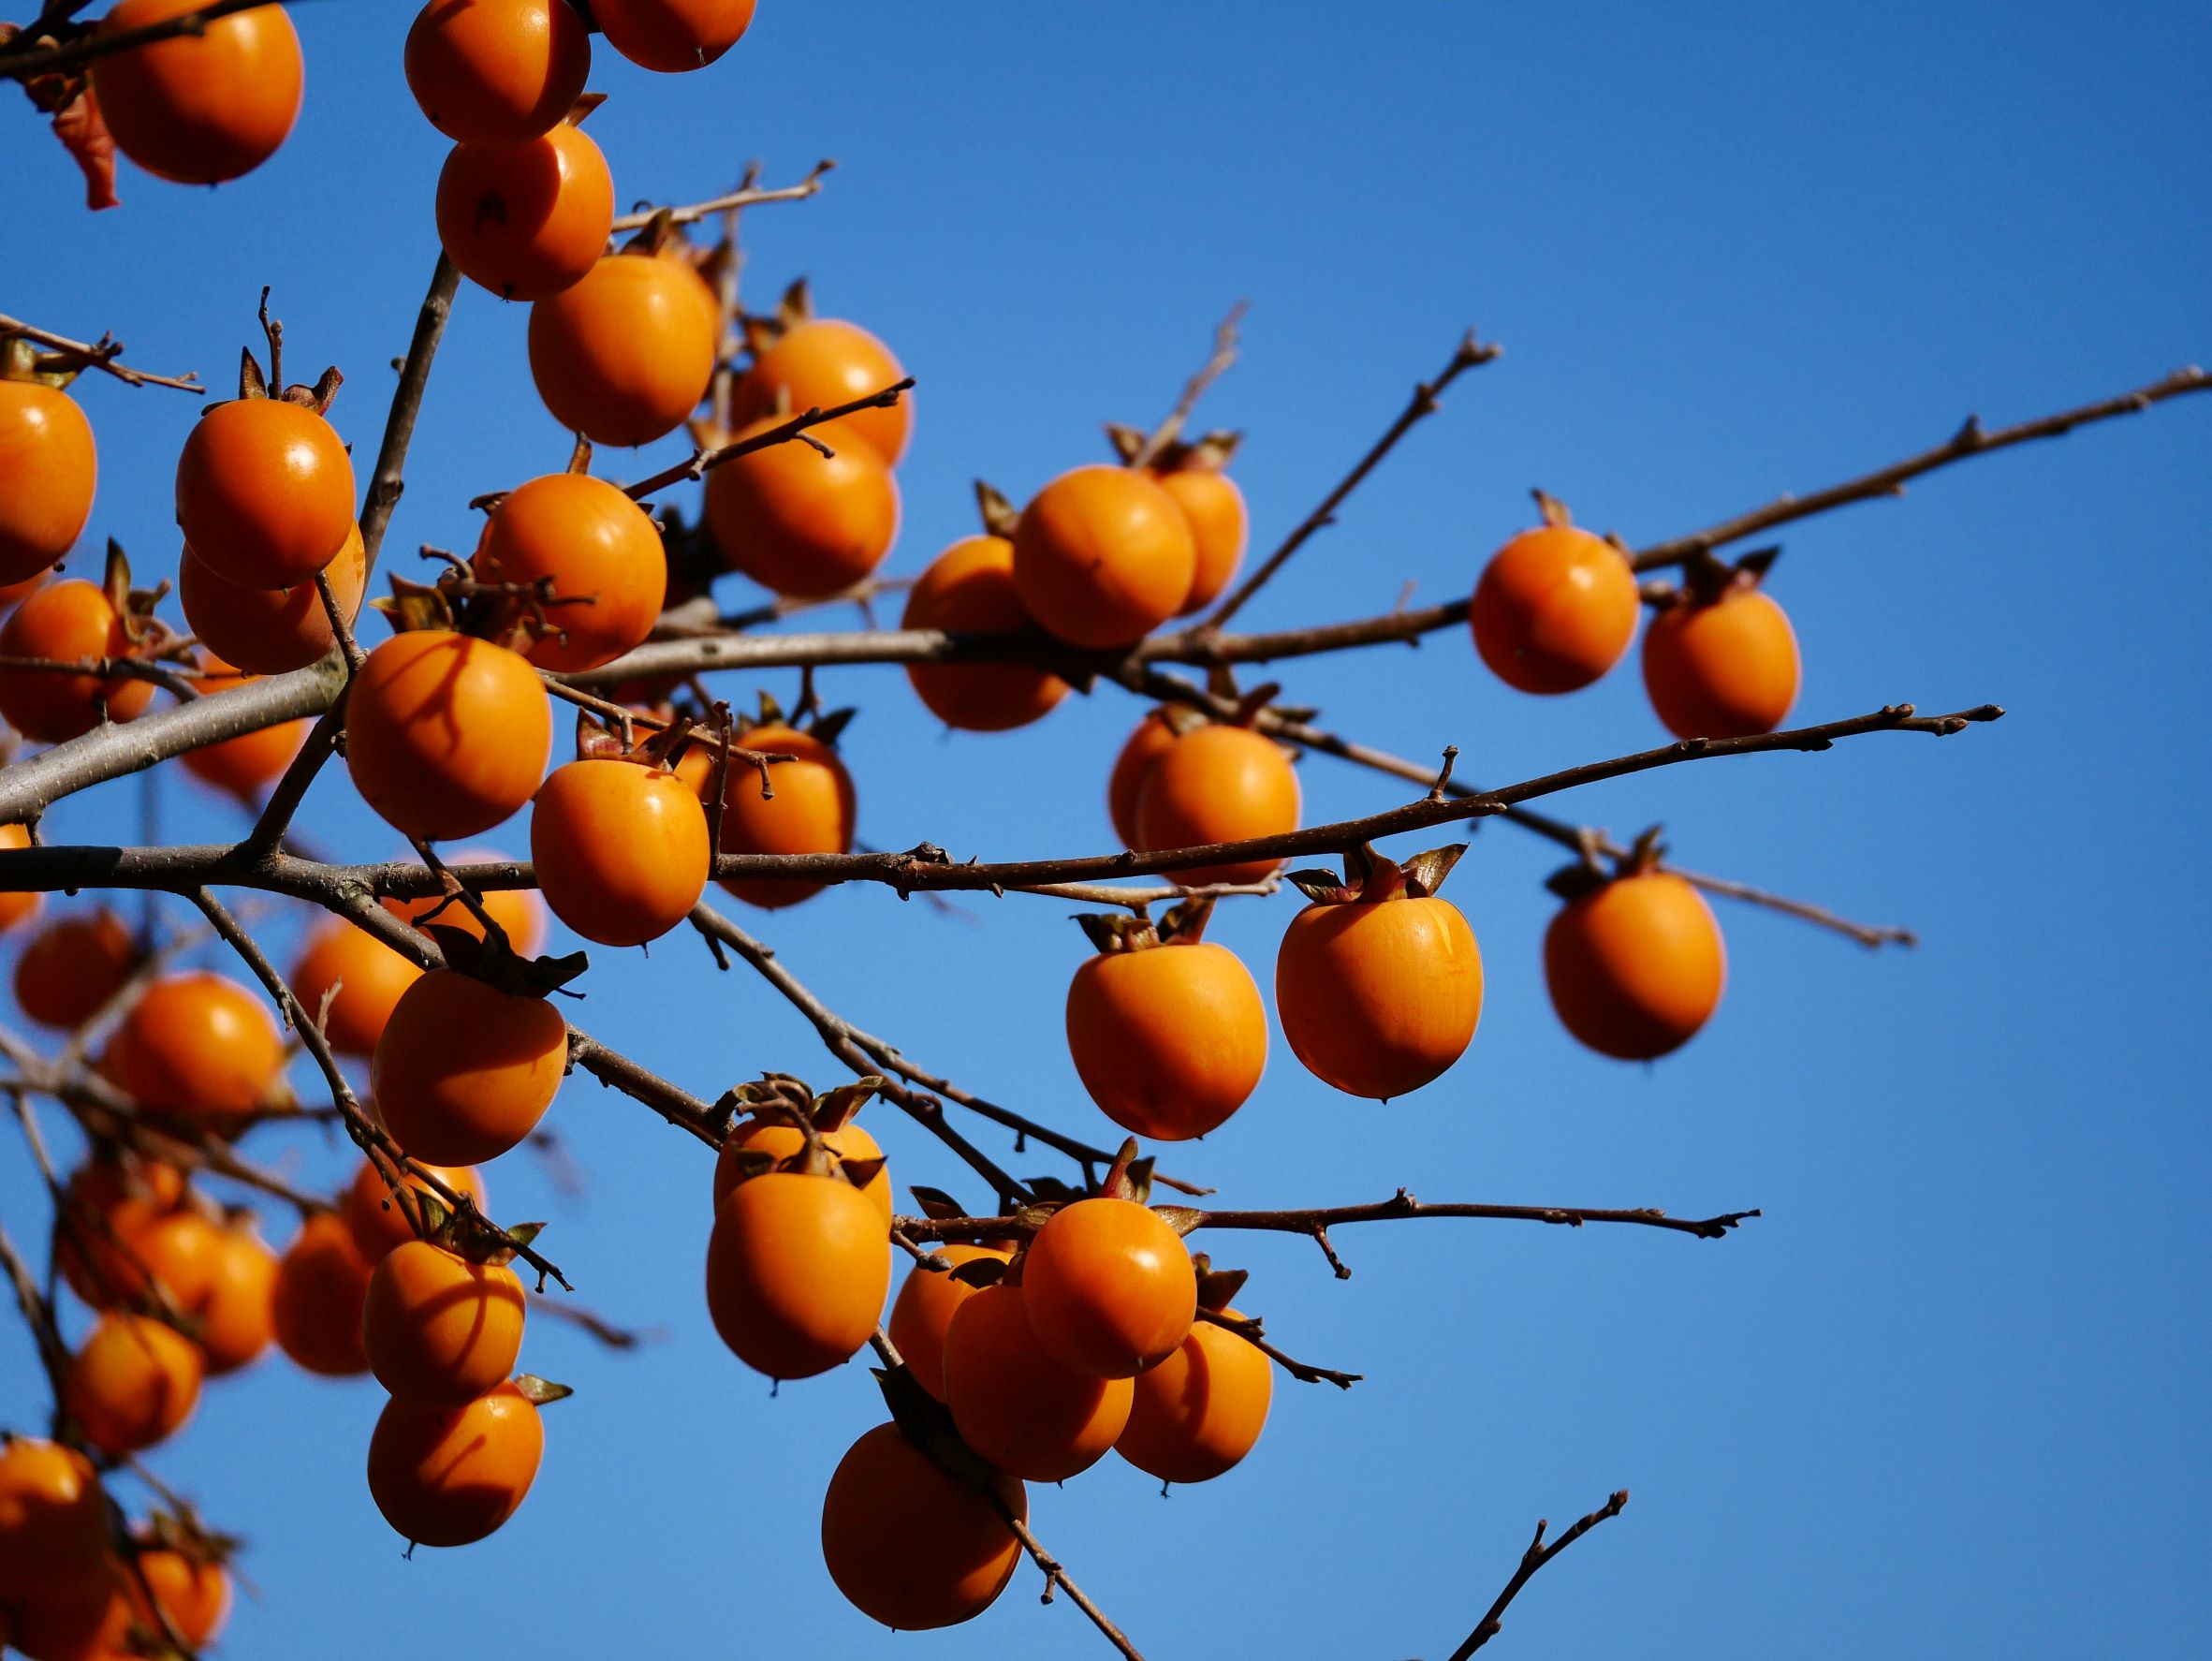 persimmons against blue sky to reflect harvesting and nature themes in the youtube videos in this article